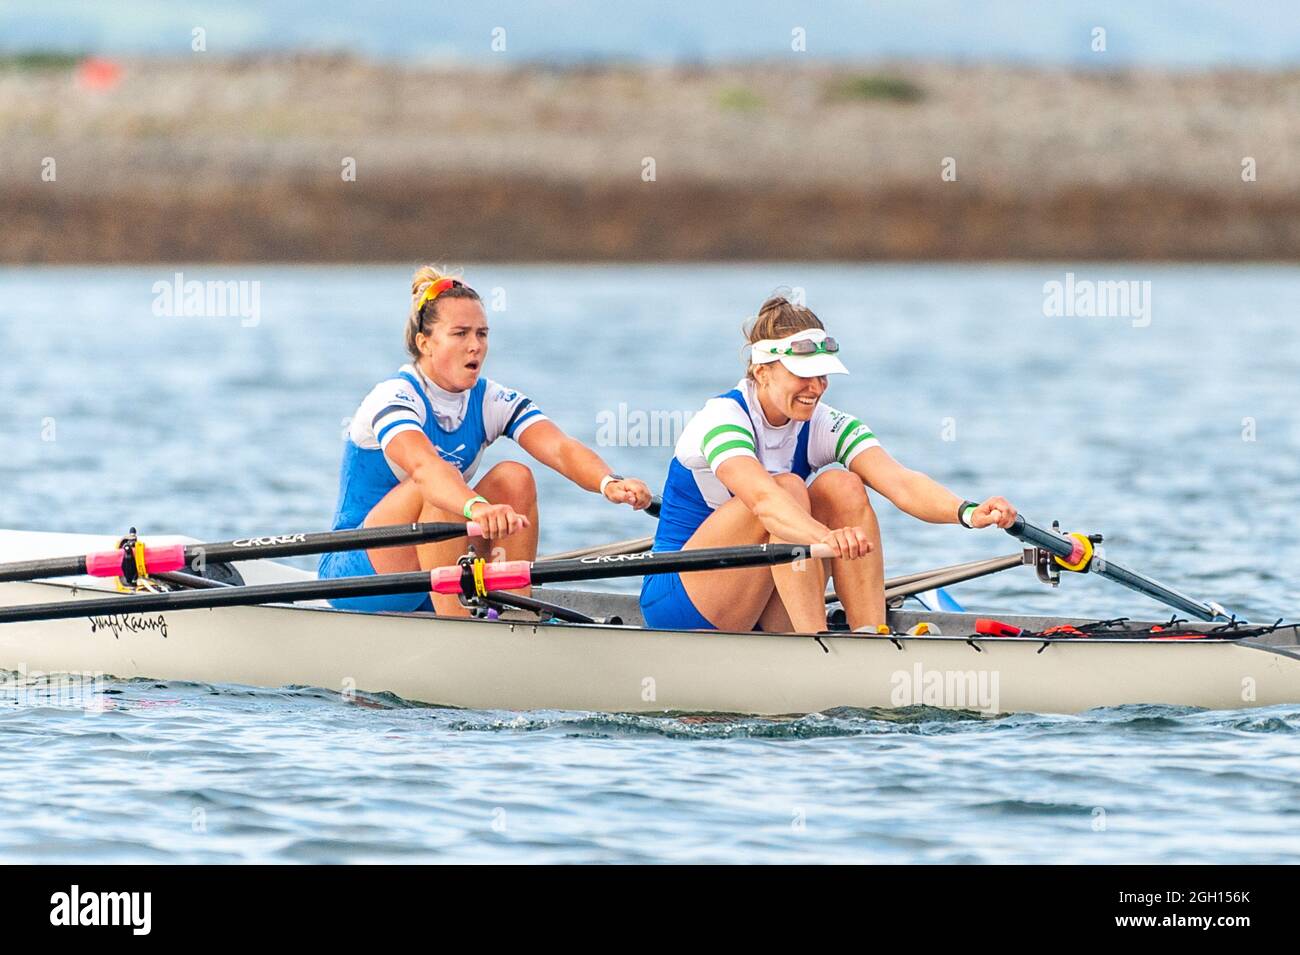 Bantry, West Cork, Ireland. 4th Sep, 2021. Rowing Ireland is holding the national offshore rowing championships in Bantry this weekend. The event, hosted by Bantry Rowing Club, is being contested by 30 rowing clubs from around Ireland. The rowers put in a lot of effort. Credit: AG News/Alamy Live News Stock Photo